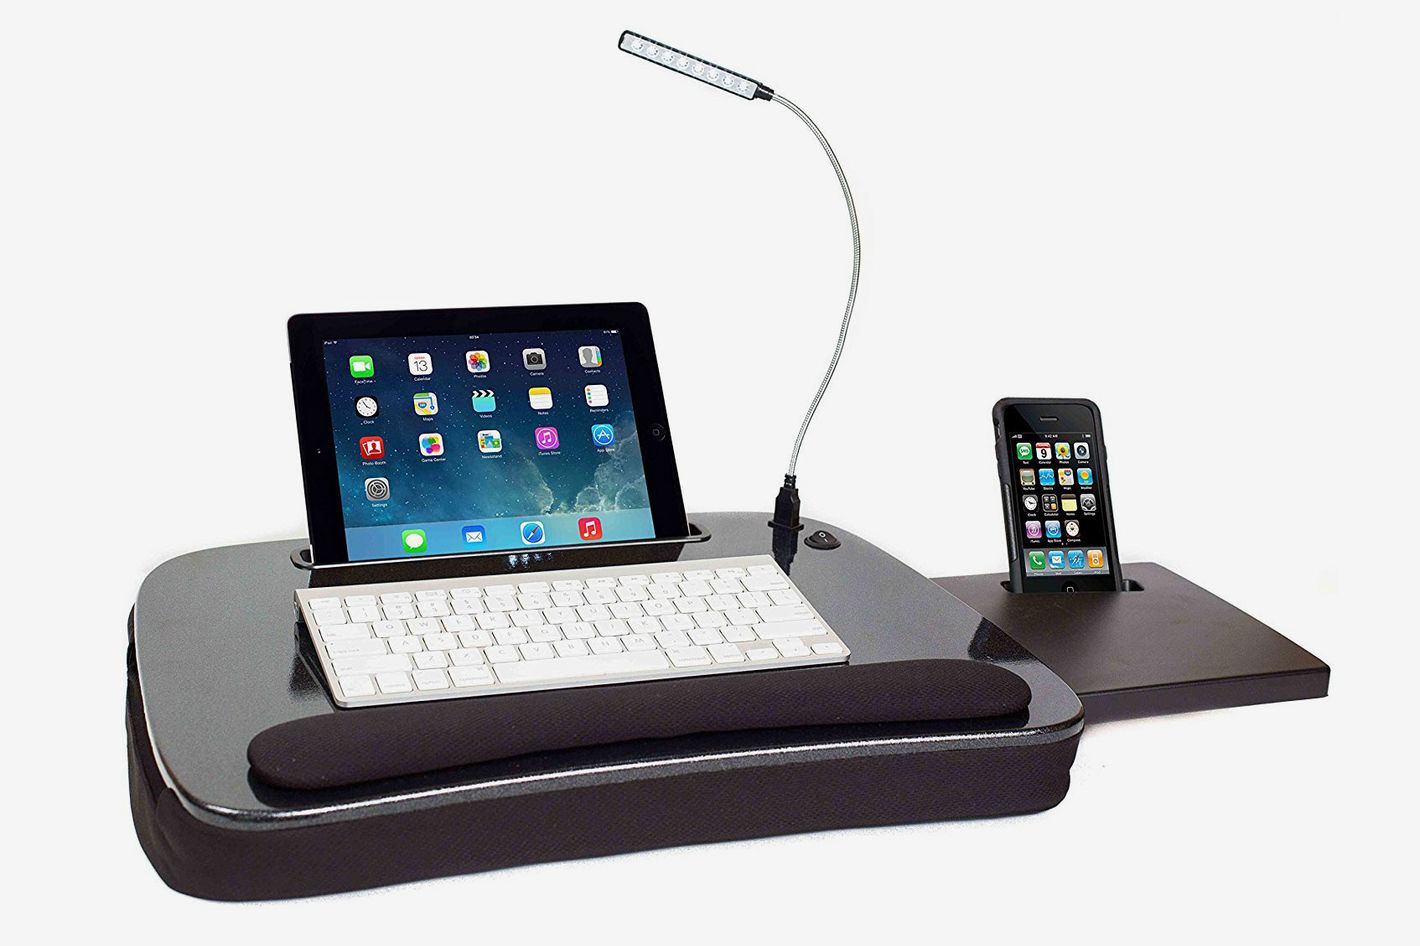 Best Lapdesk 2024 - IGN